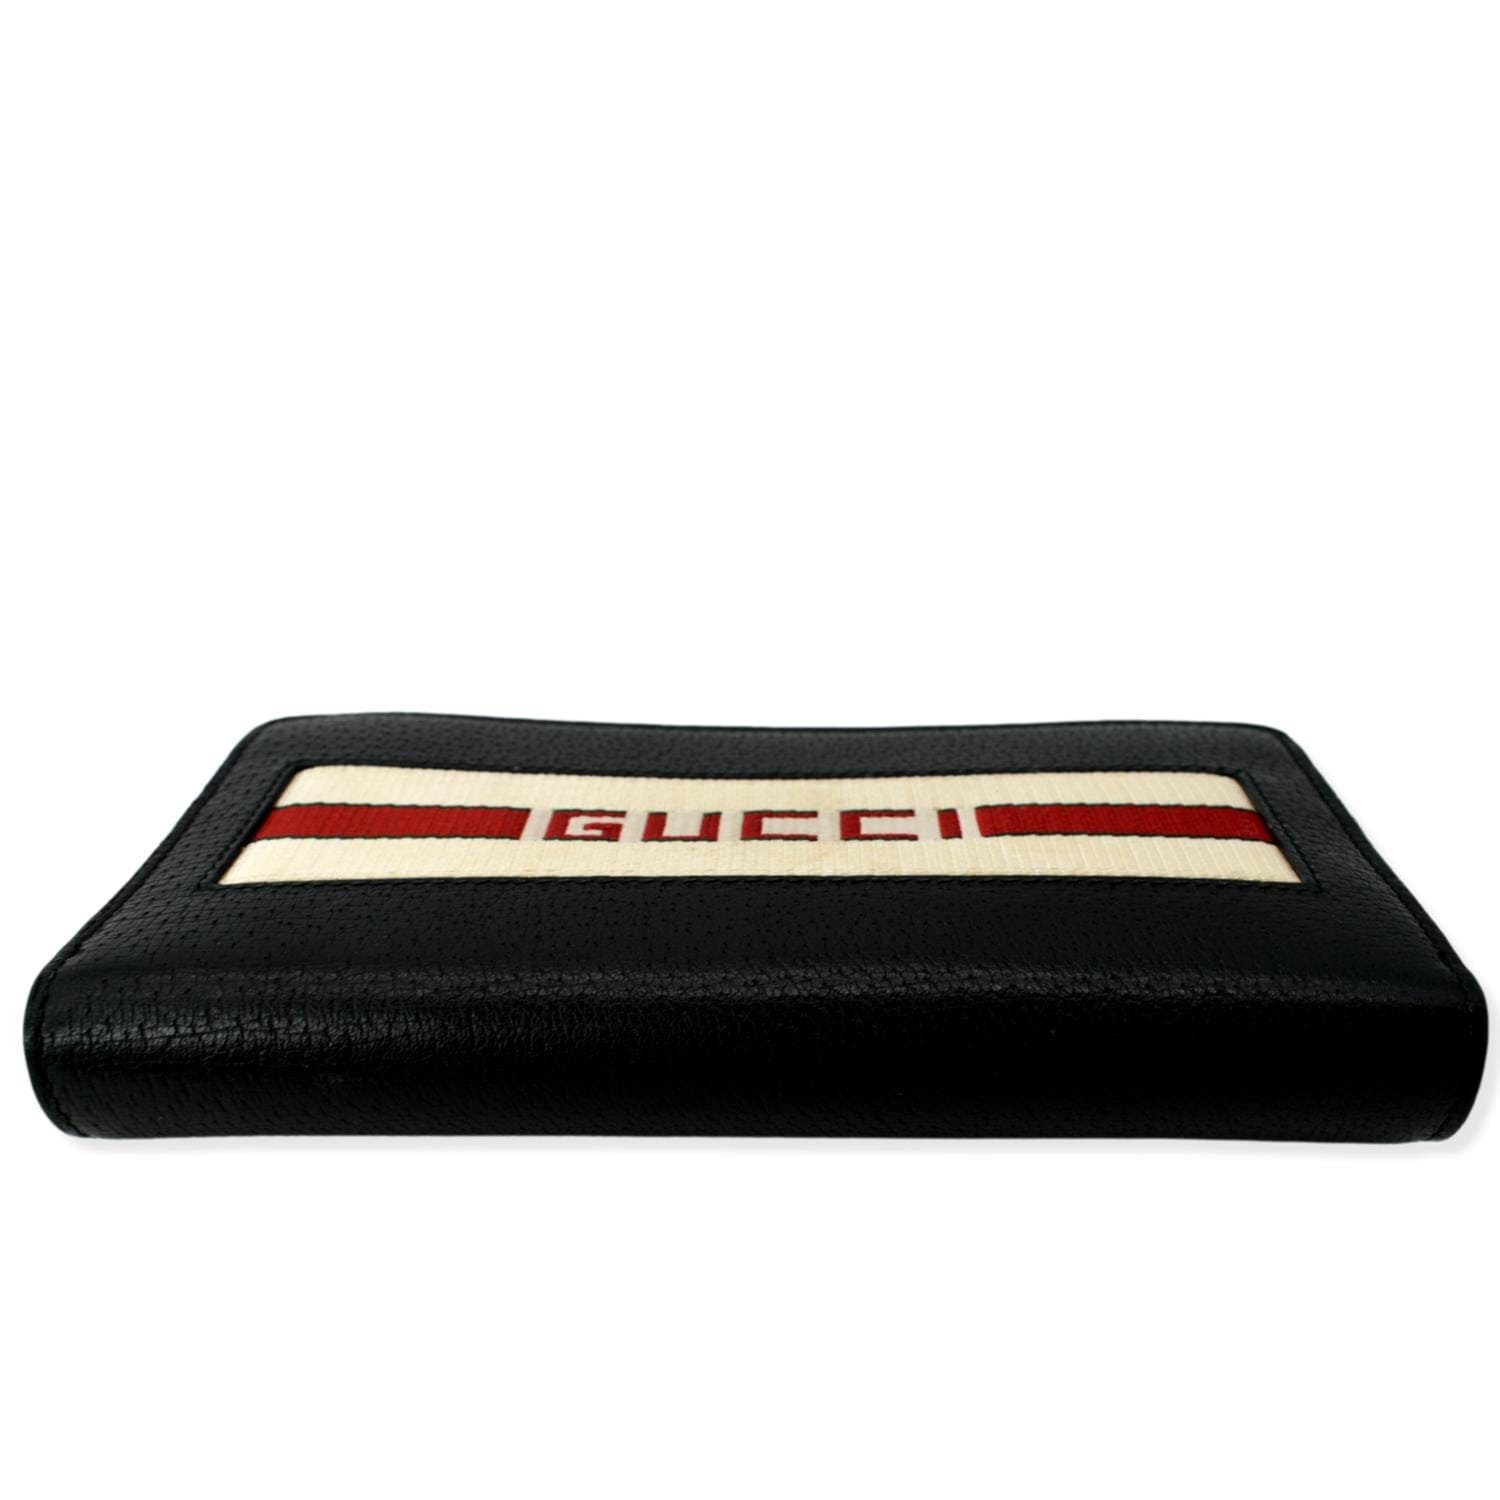 💥SPECIAL REDUCED PRICE! No offers FIRM!✓👑AUTHENTIC Gucci Web Long Wallet